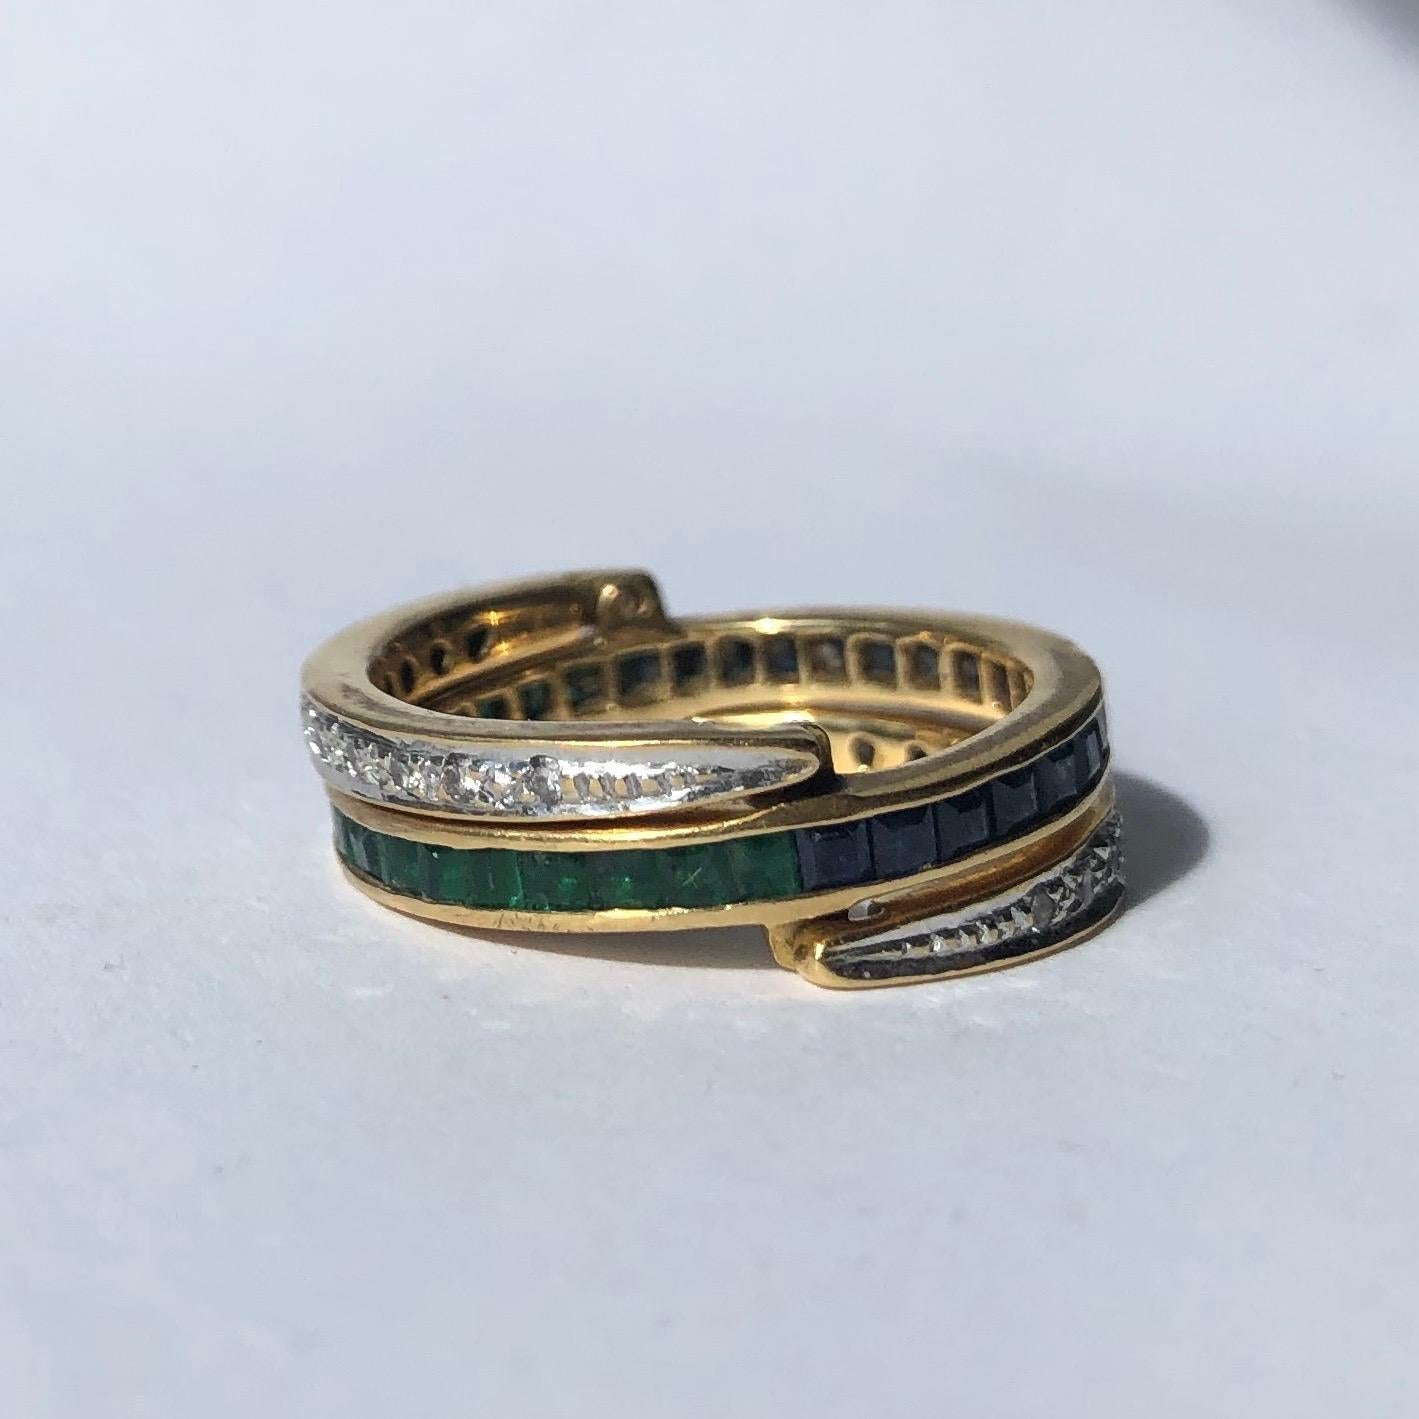 This ring is absolutely fabulous! The main central band is half sapphire and half emerald. Either side is a simple band of diamonds. You could wear this in so many ways. The sapphires and emeralds total approximately 90pts each and the diamonds